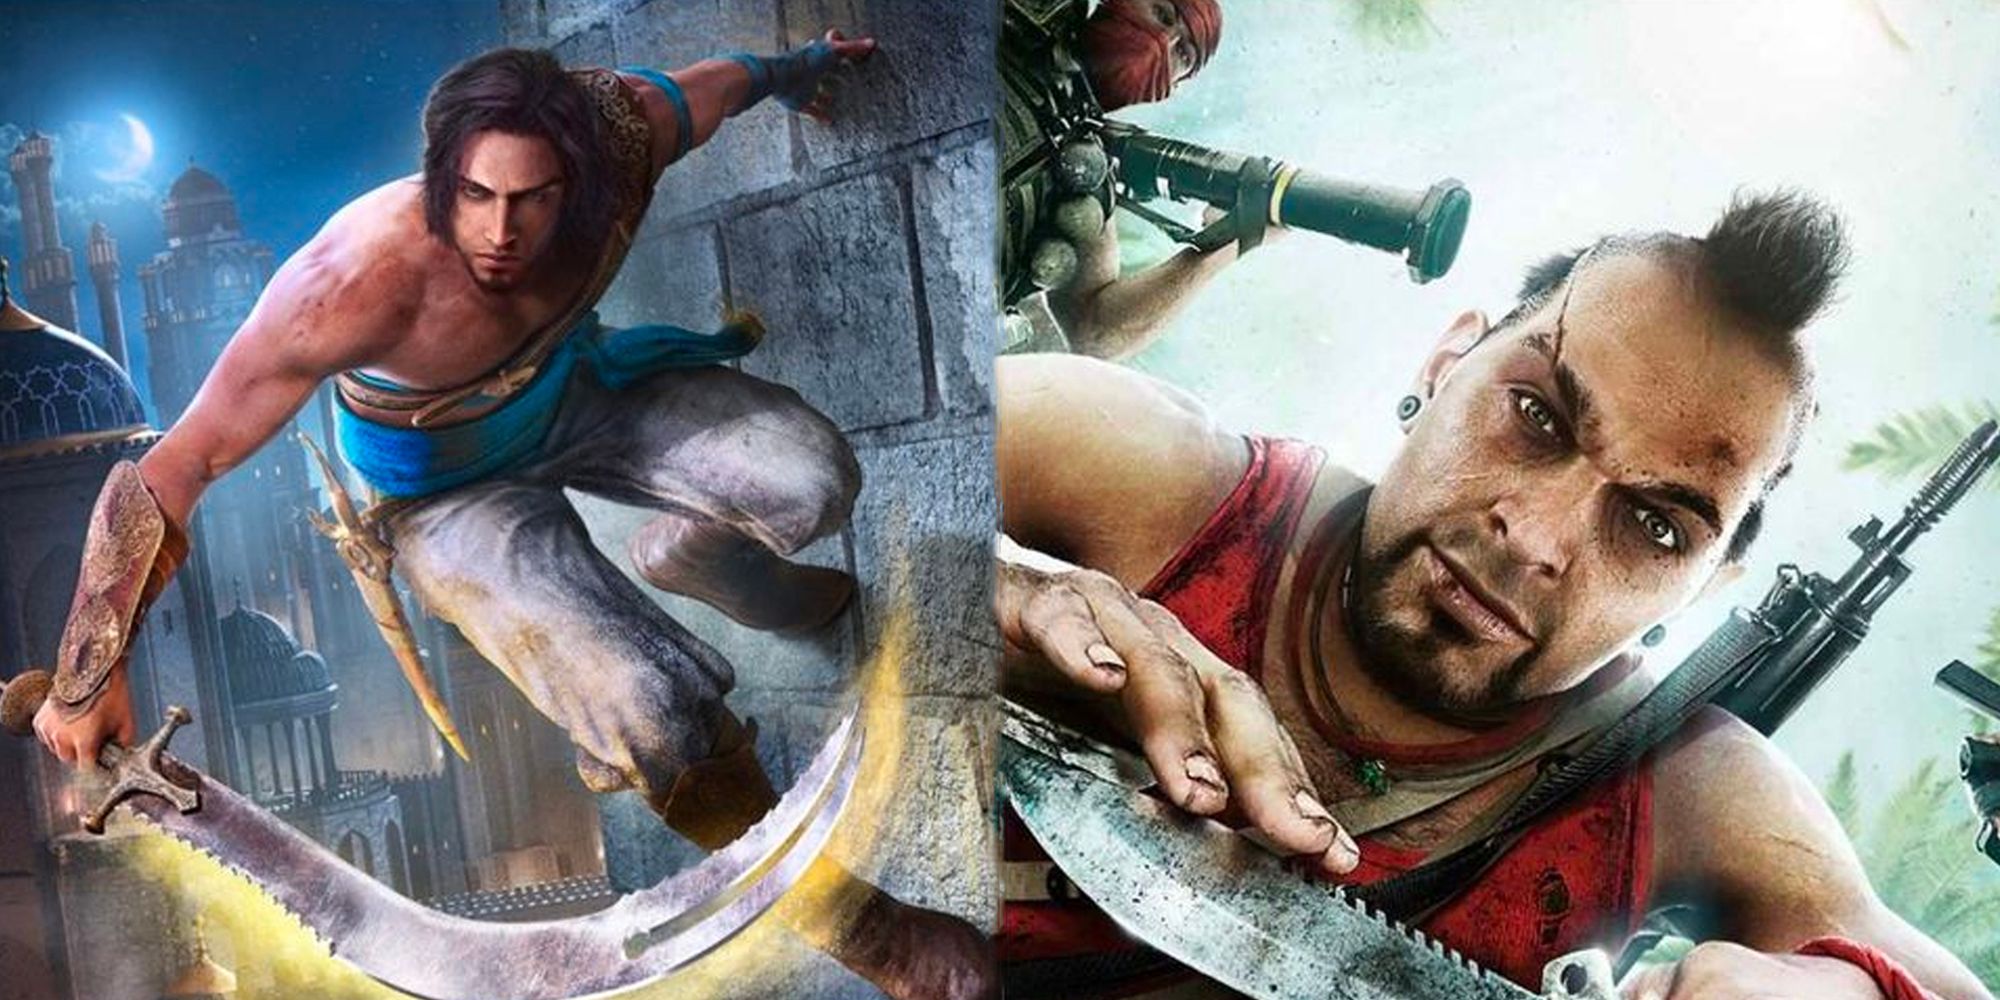 Side by side images of main character promo shots for Prince of Persia and FarCry